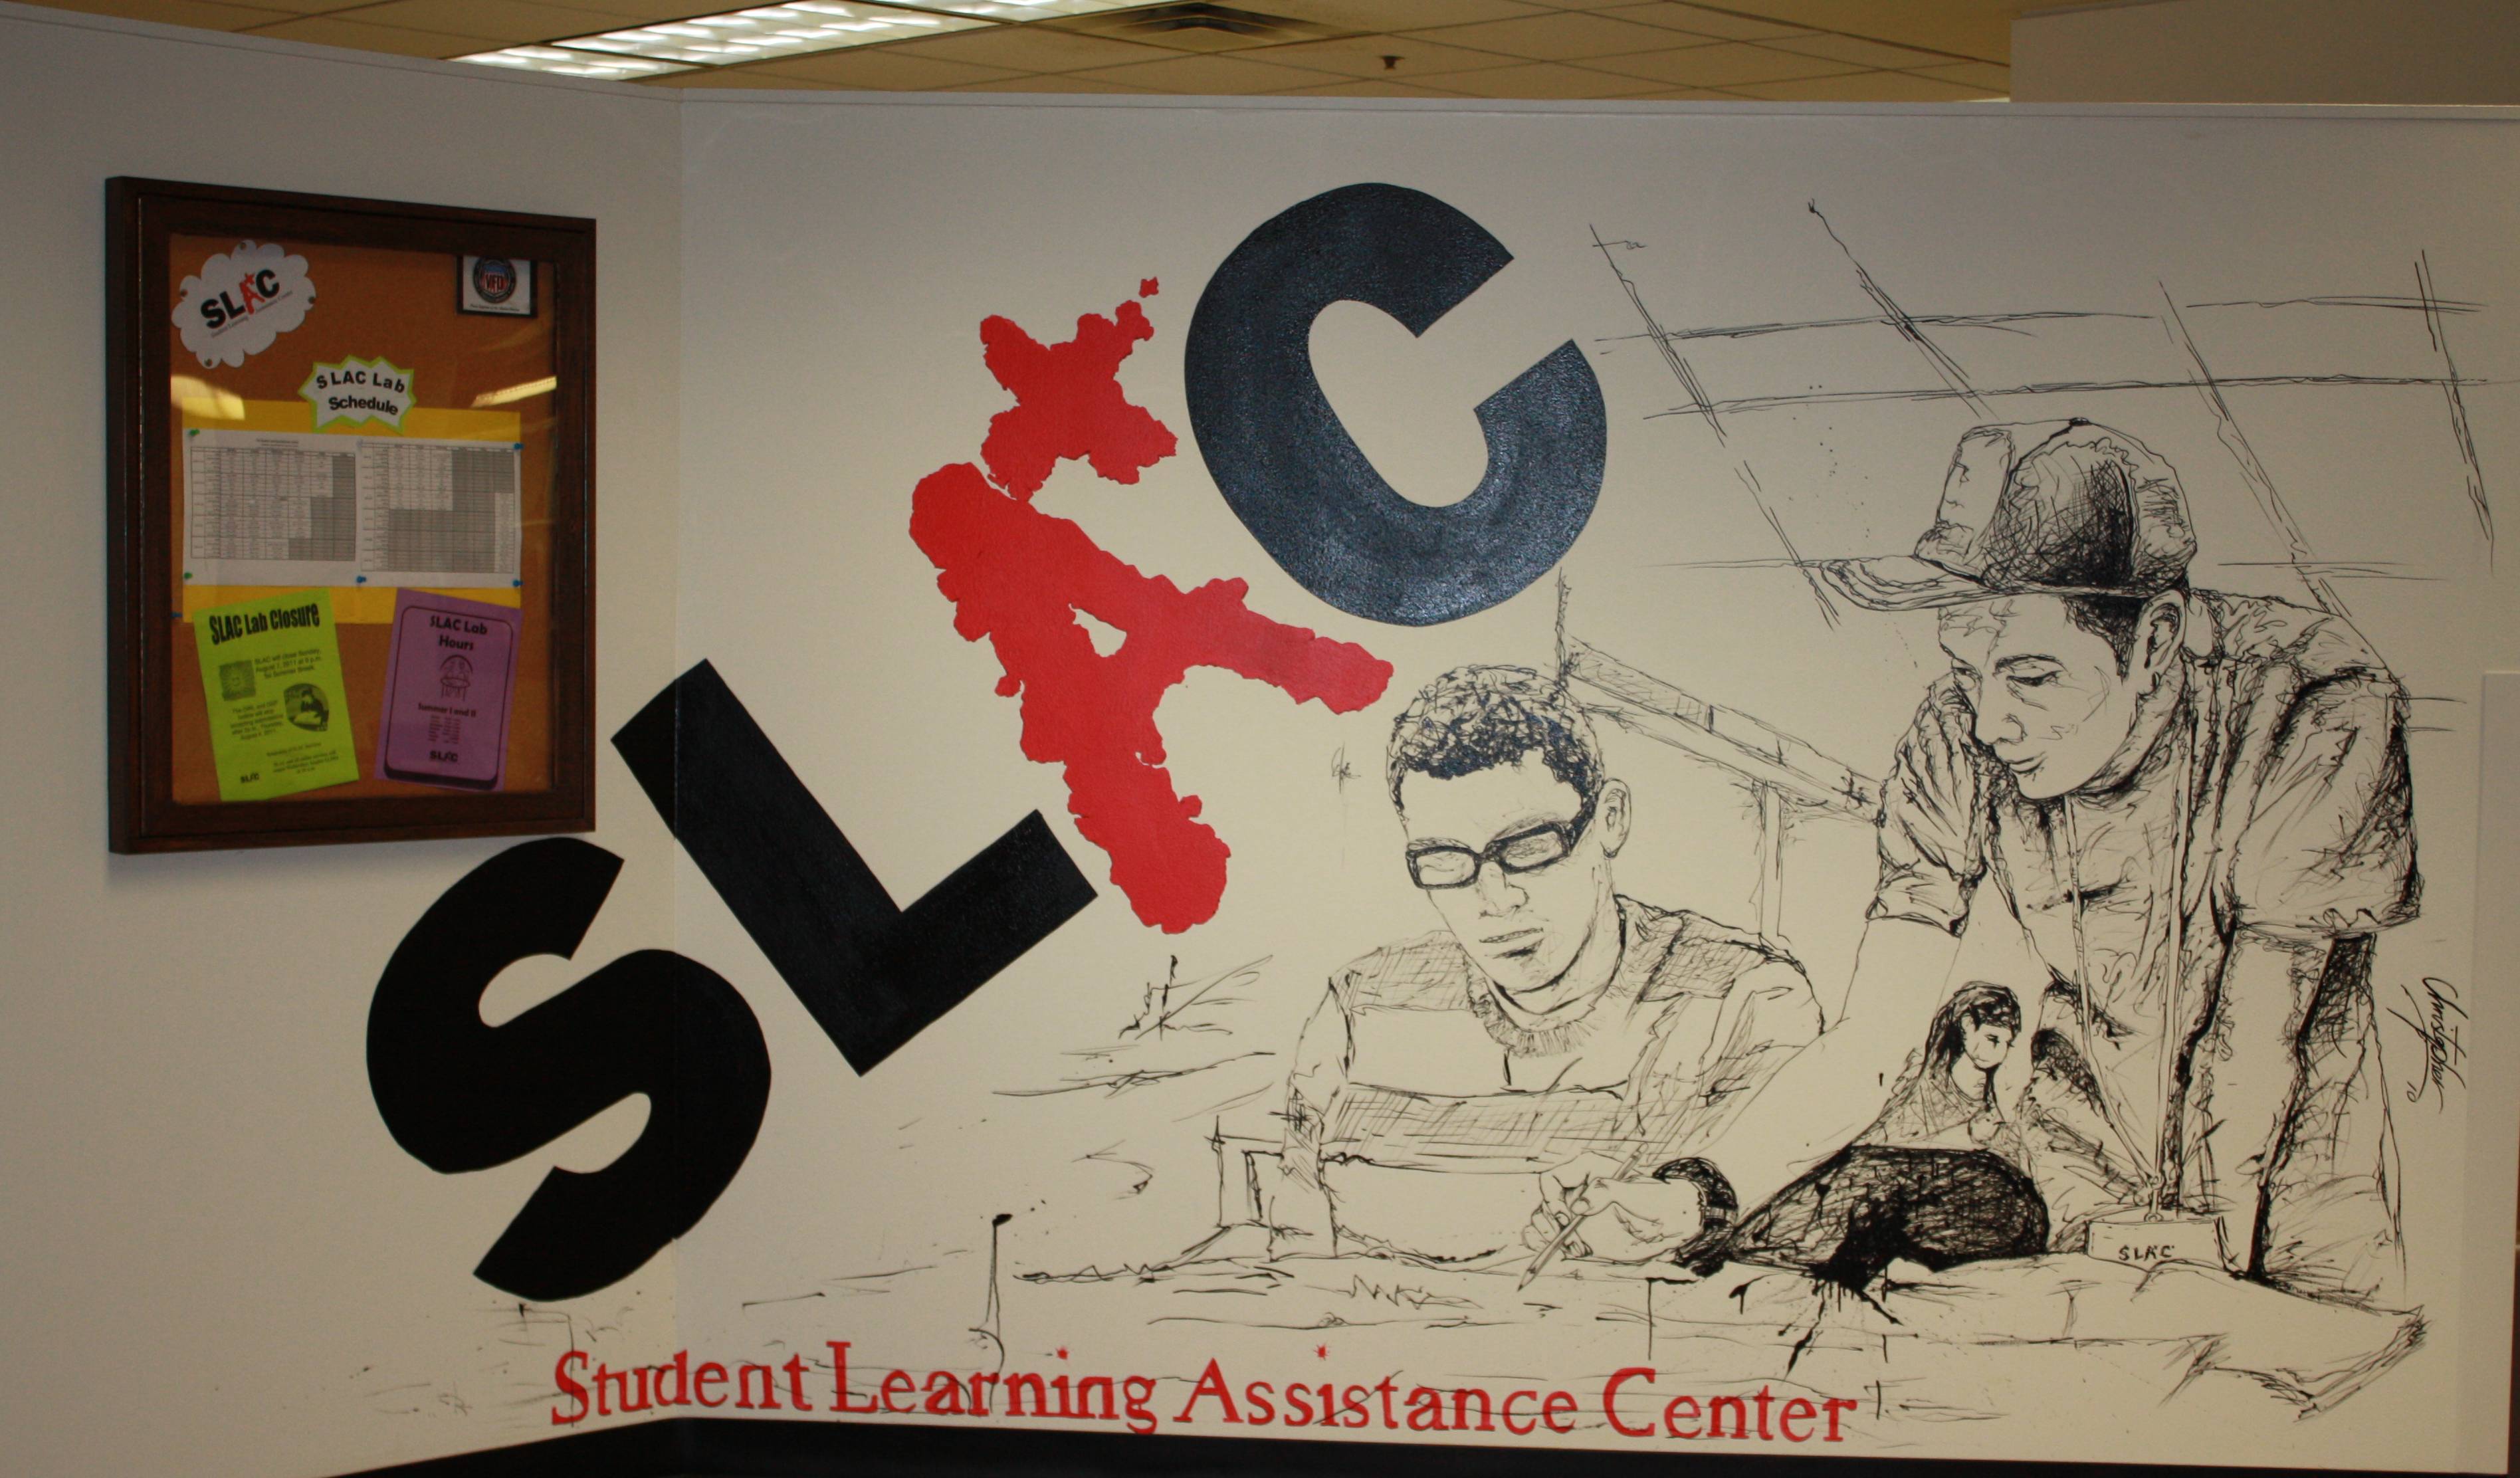 SLAC's "The Study" Mural